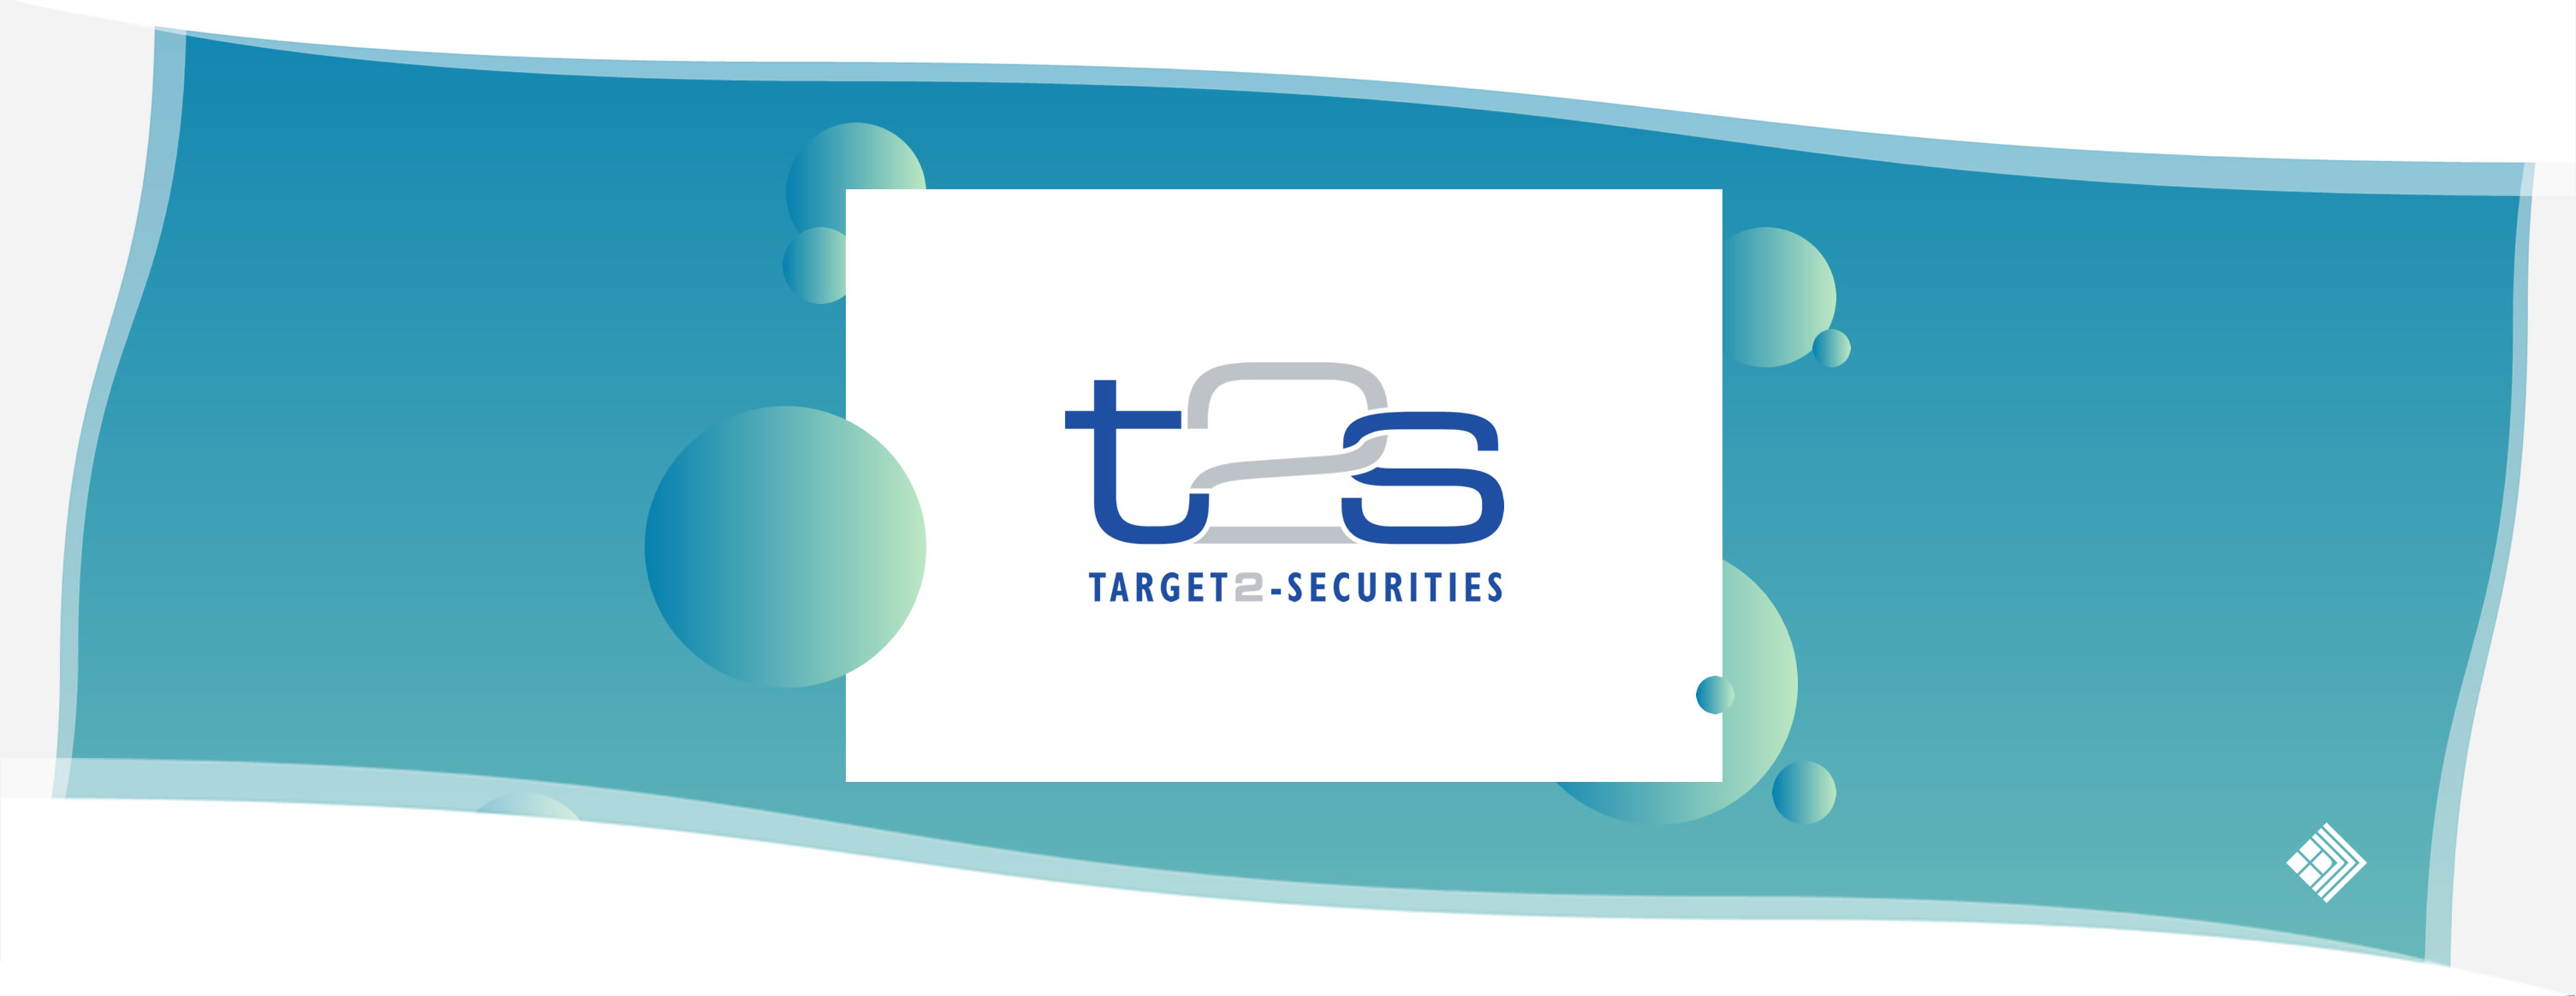 T2S - Target 2 Securities Consolidation CADIT